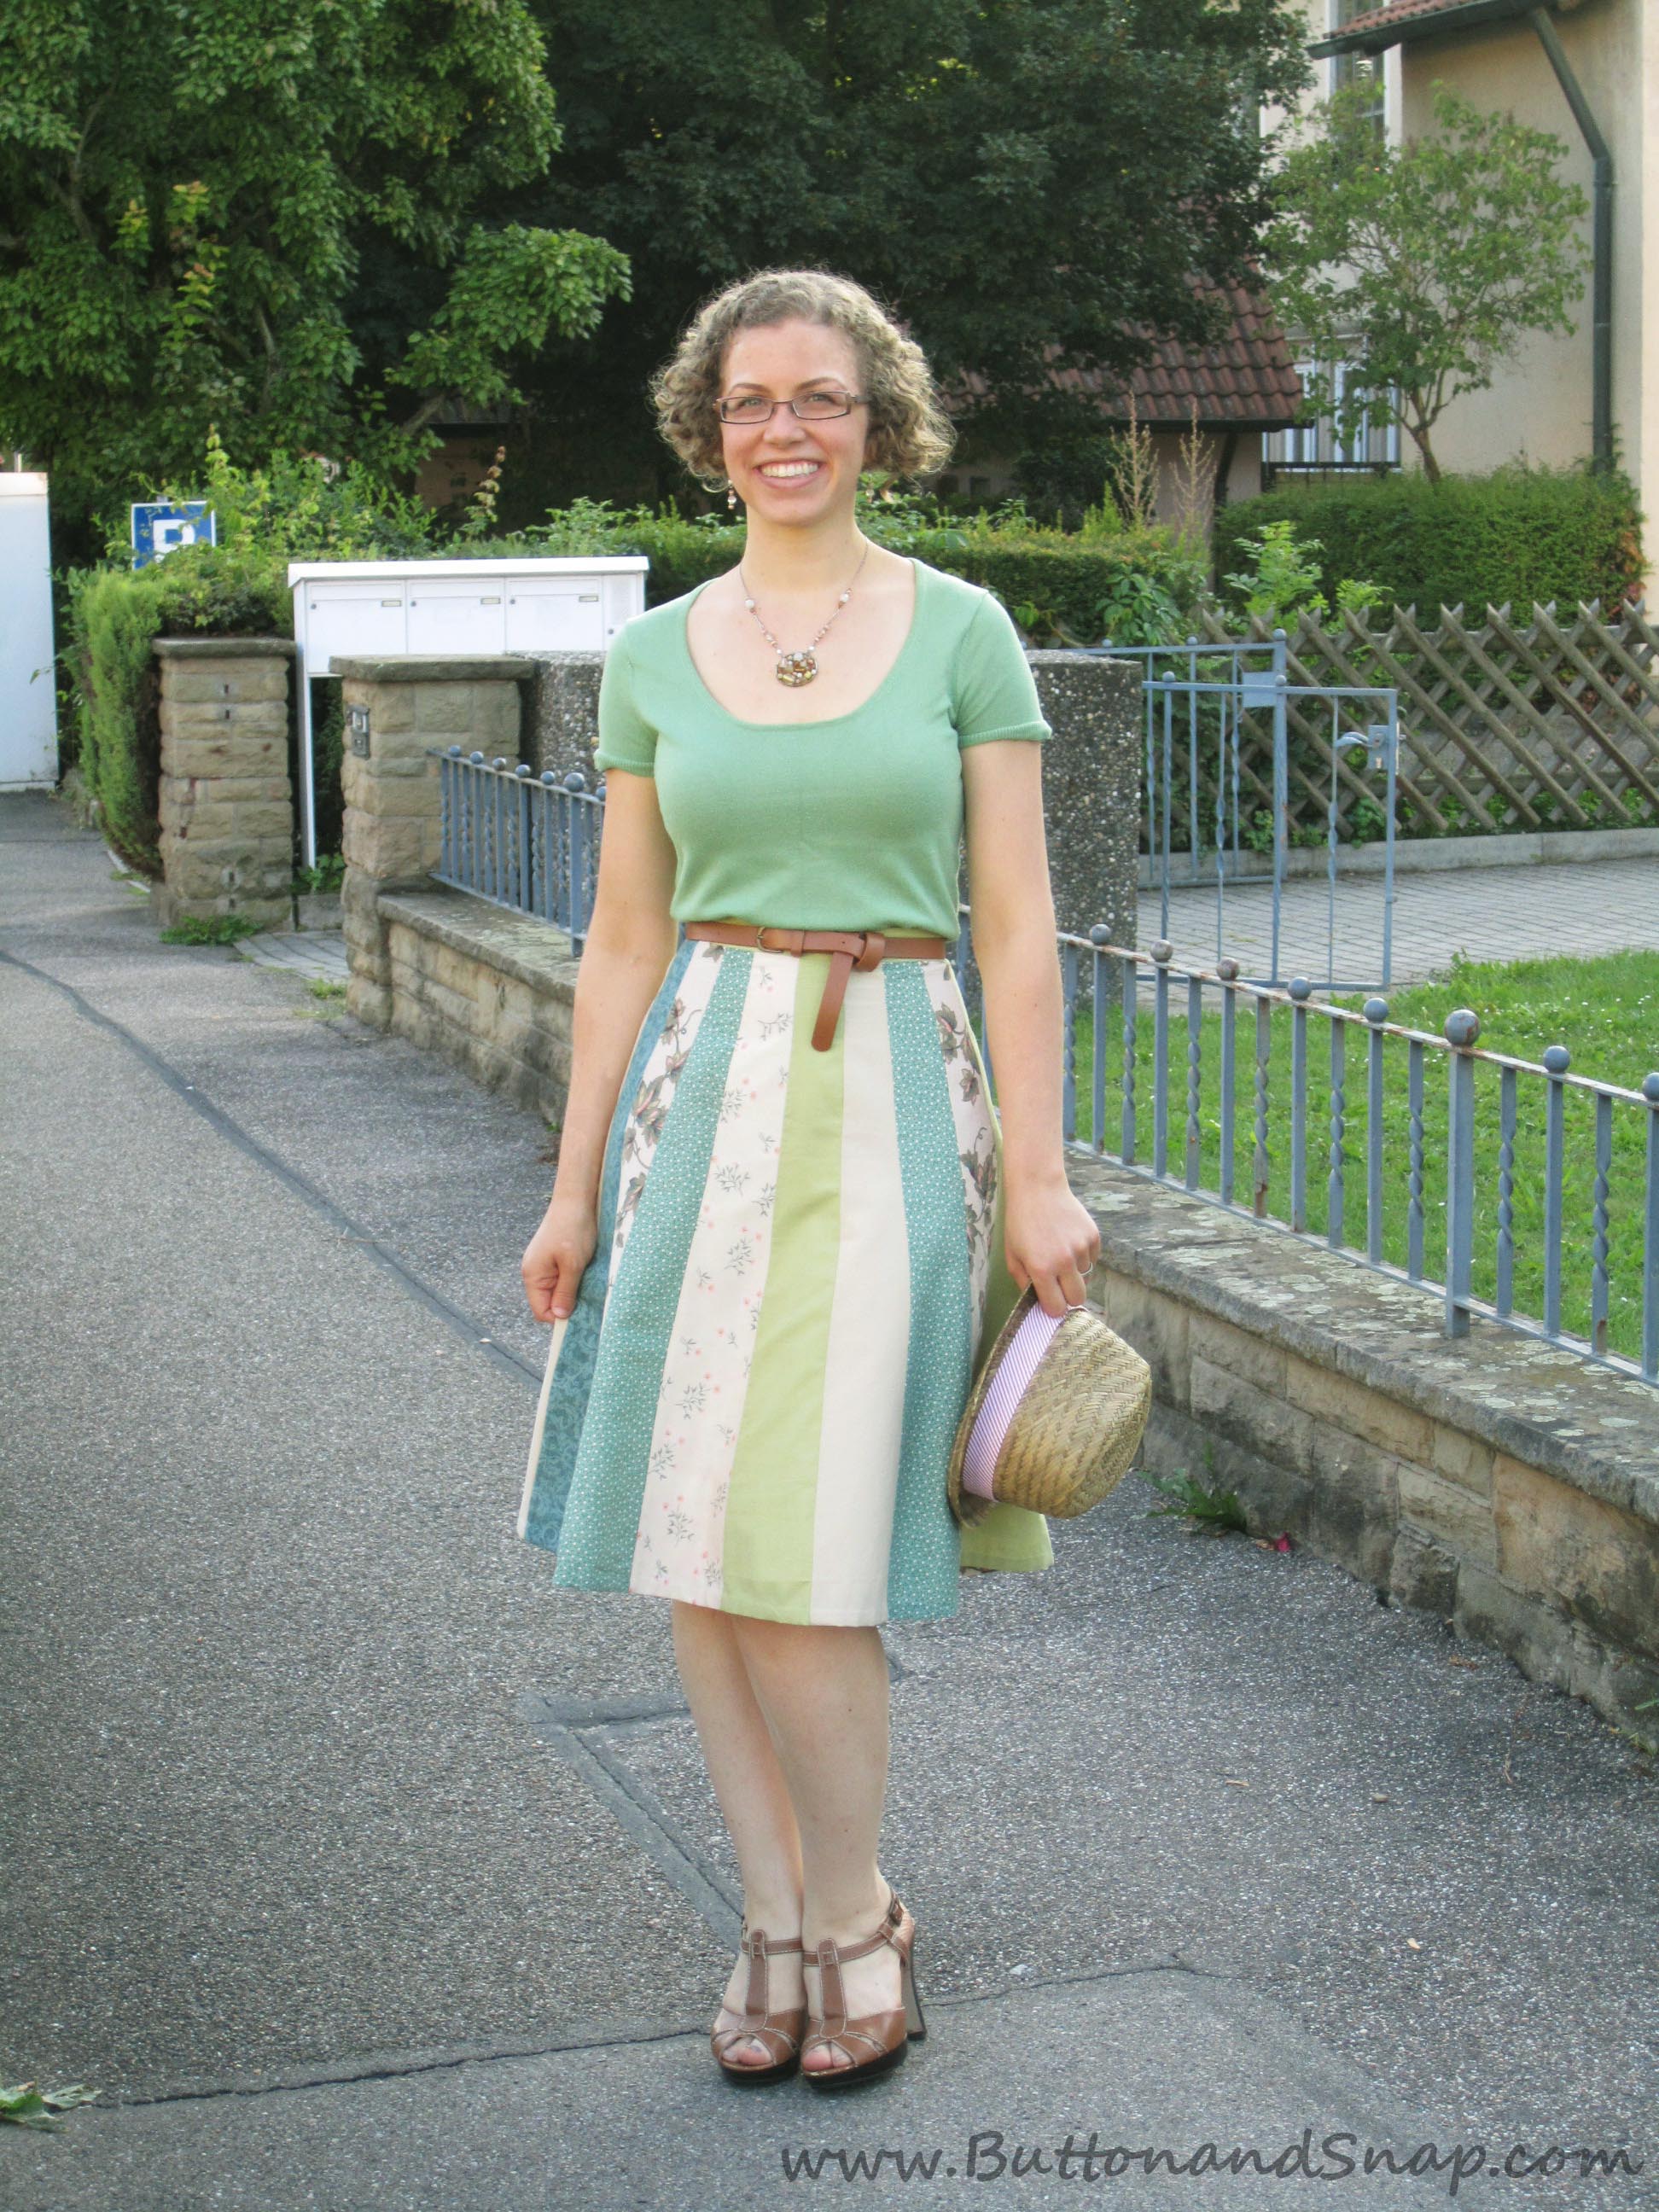 Skirt made from Scraps